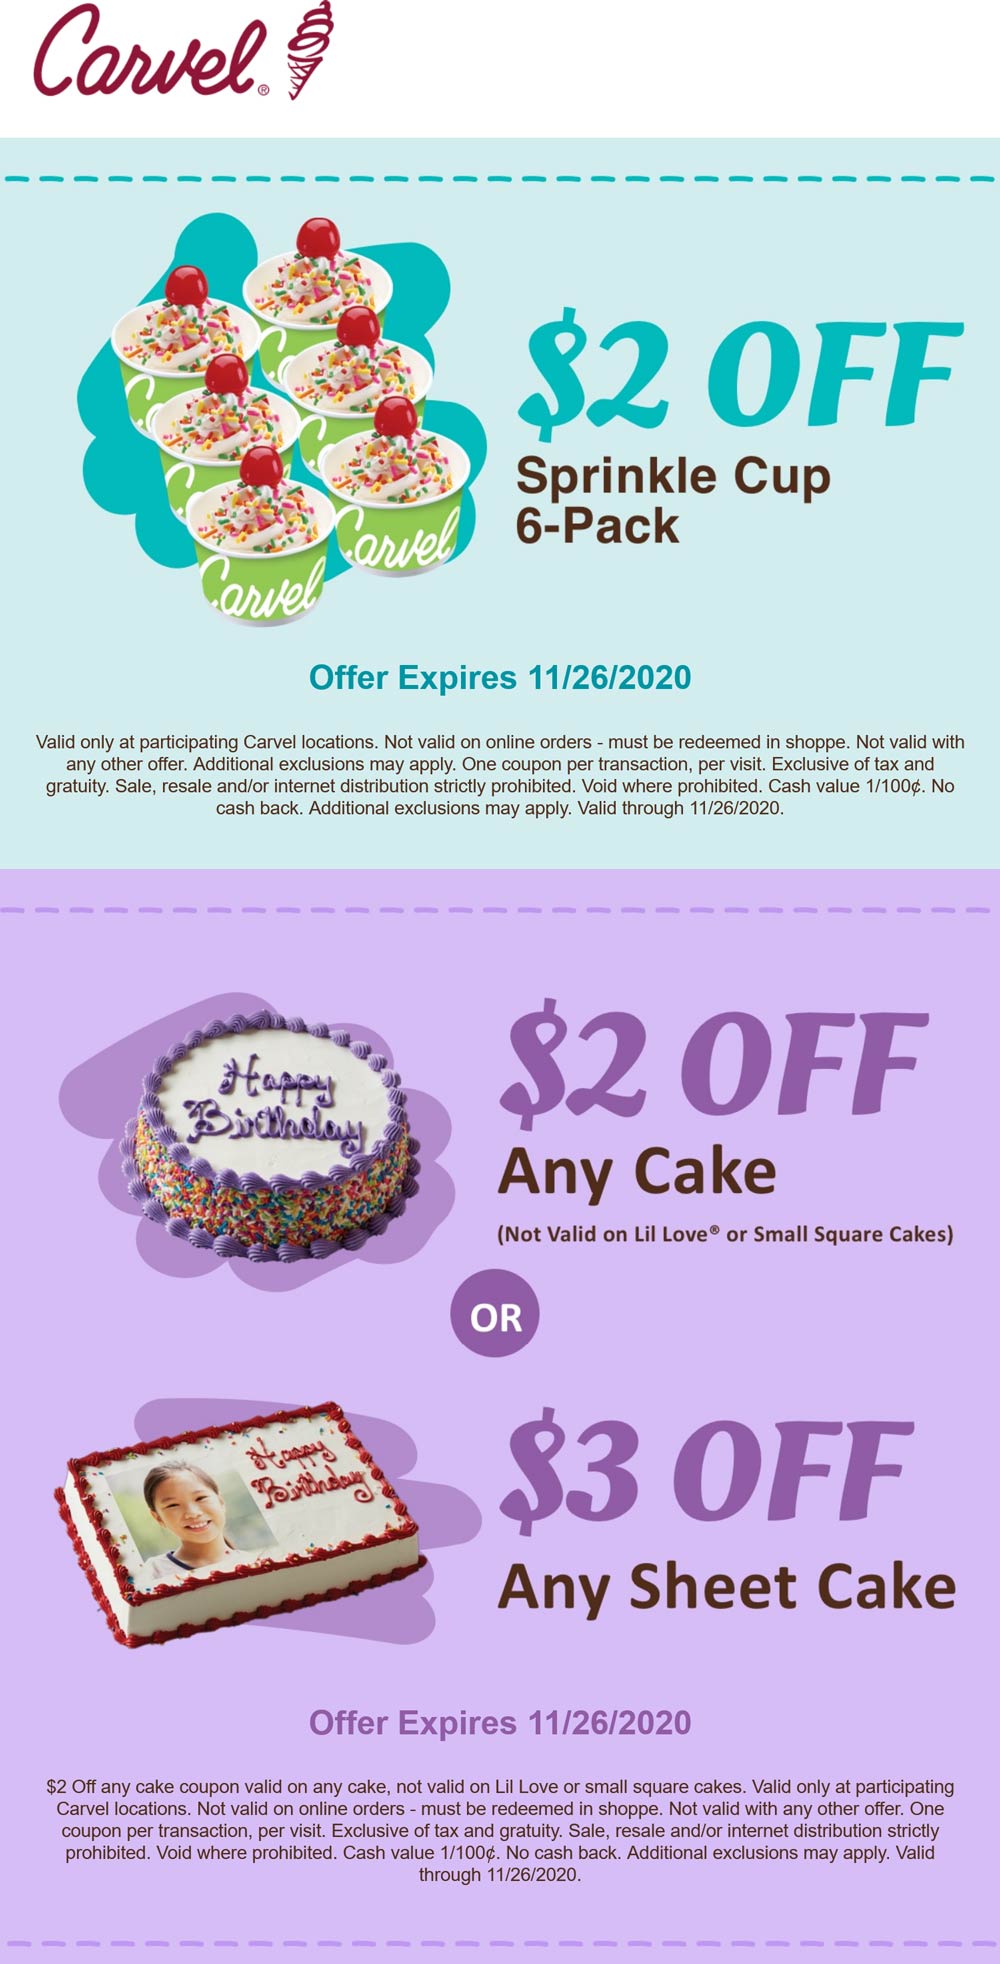 Carvel restaurants Coupon  Couple bucks off cakes and sprinkle cups at Carvel ice cream #carvel 